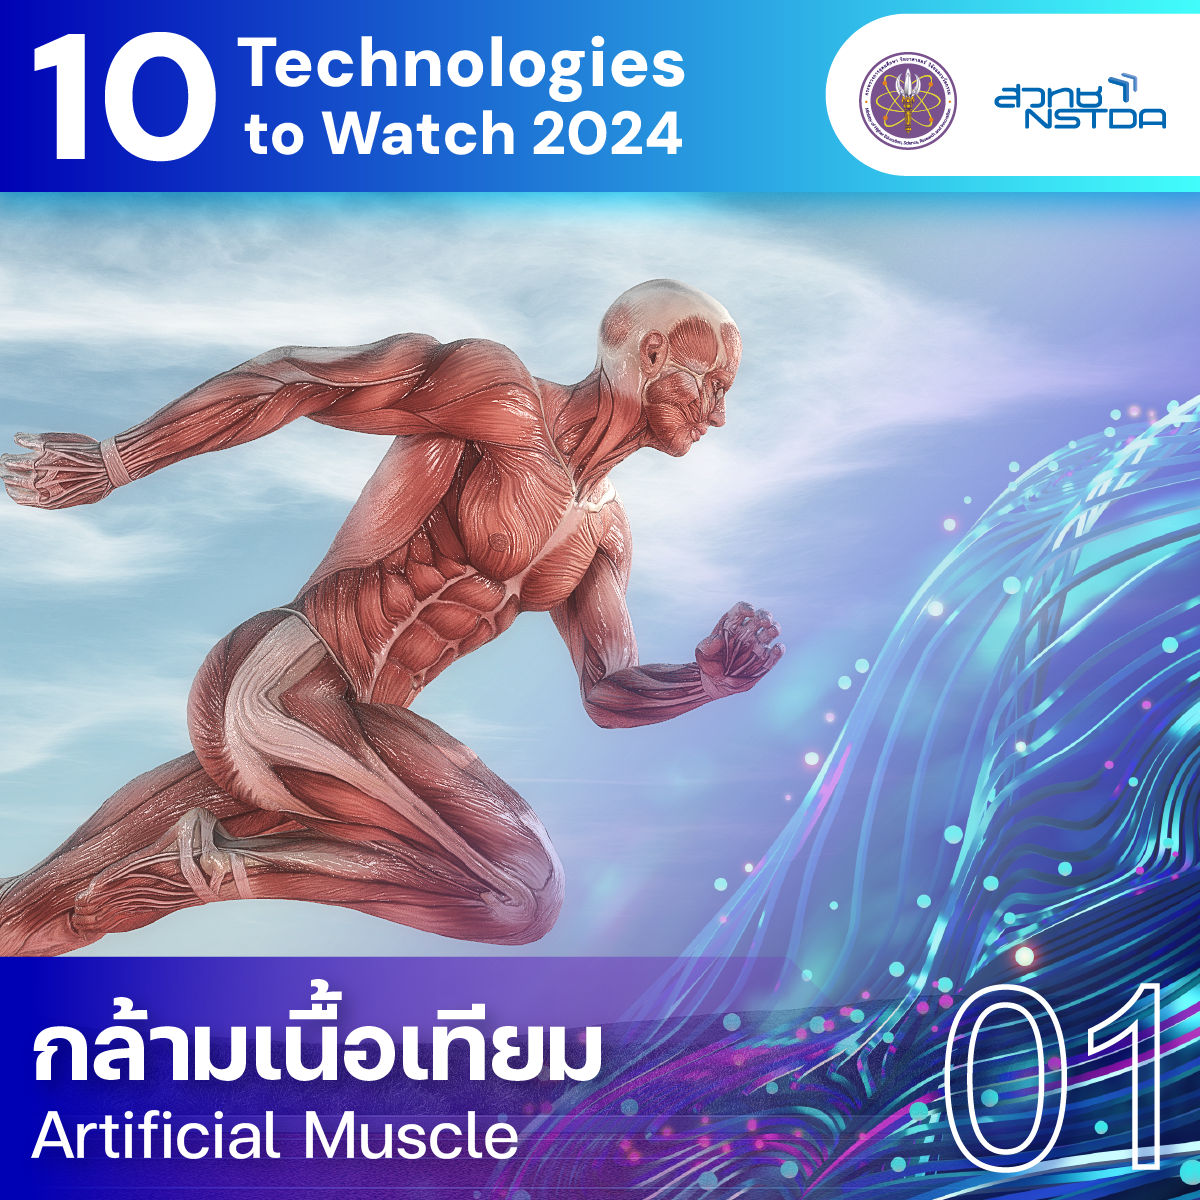 10 Technologies to Watch 2024: กล้ามเนื้อเทียม (Artificial Muscle)